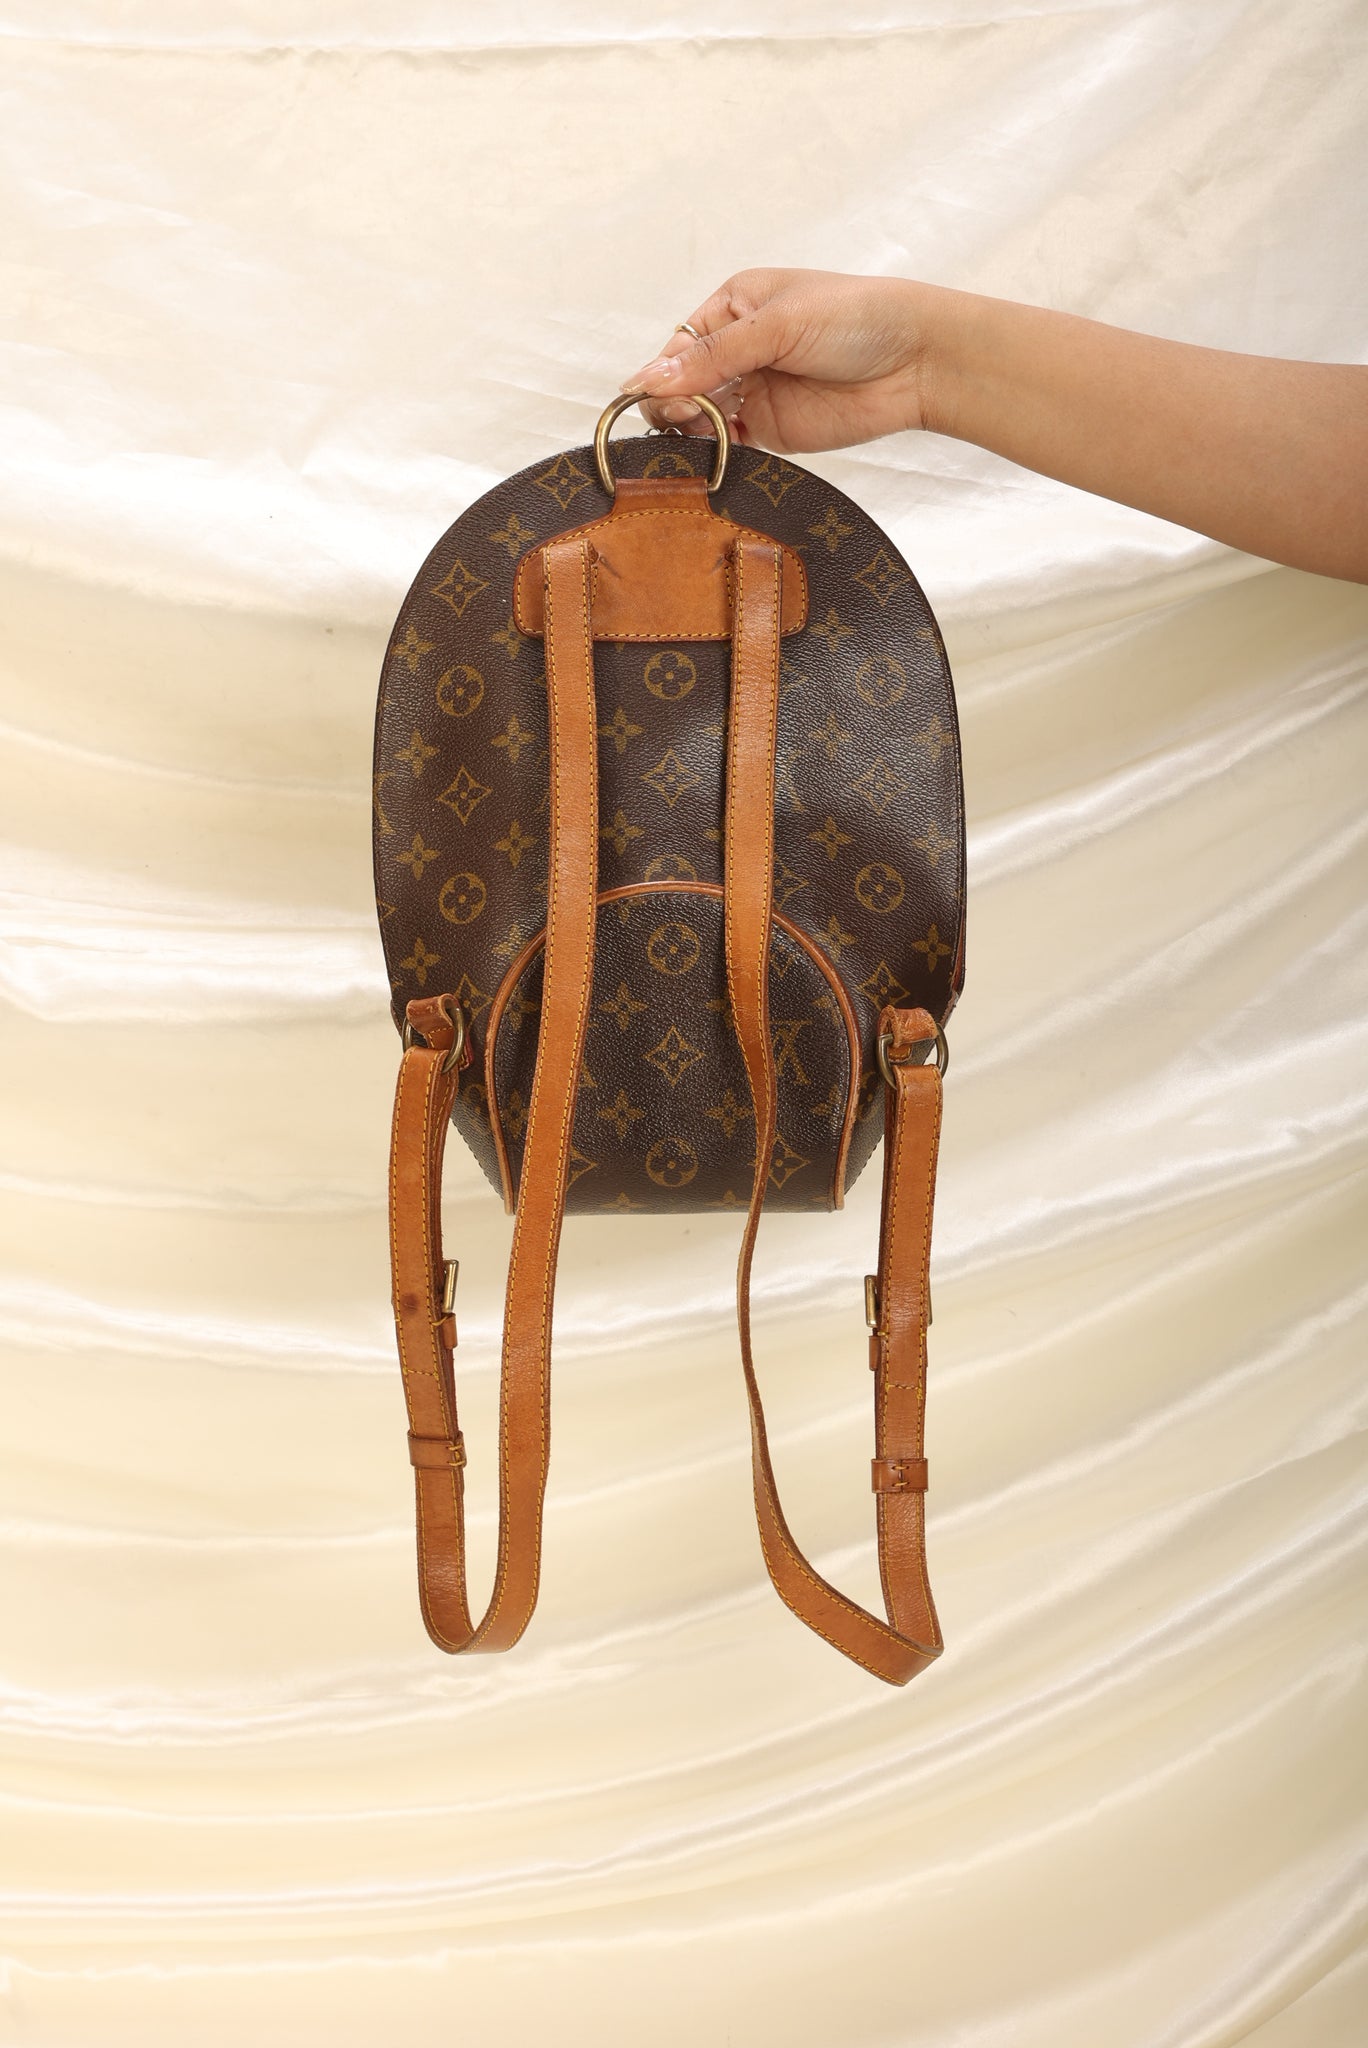 real louis vuitton ellipse backpack